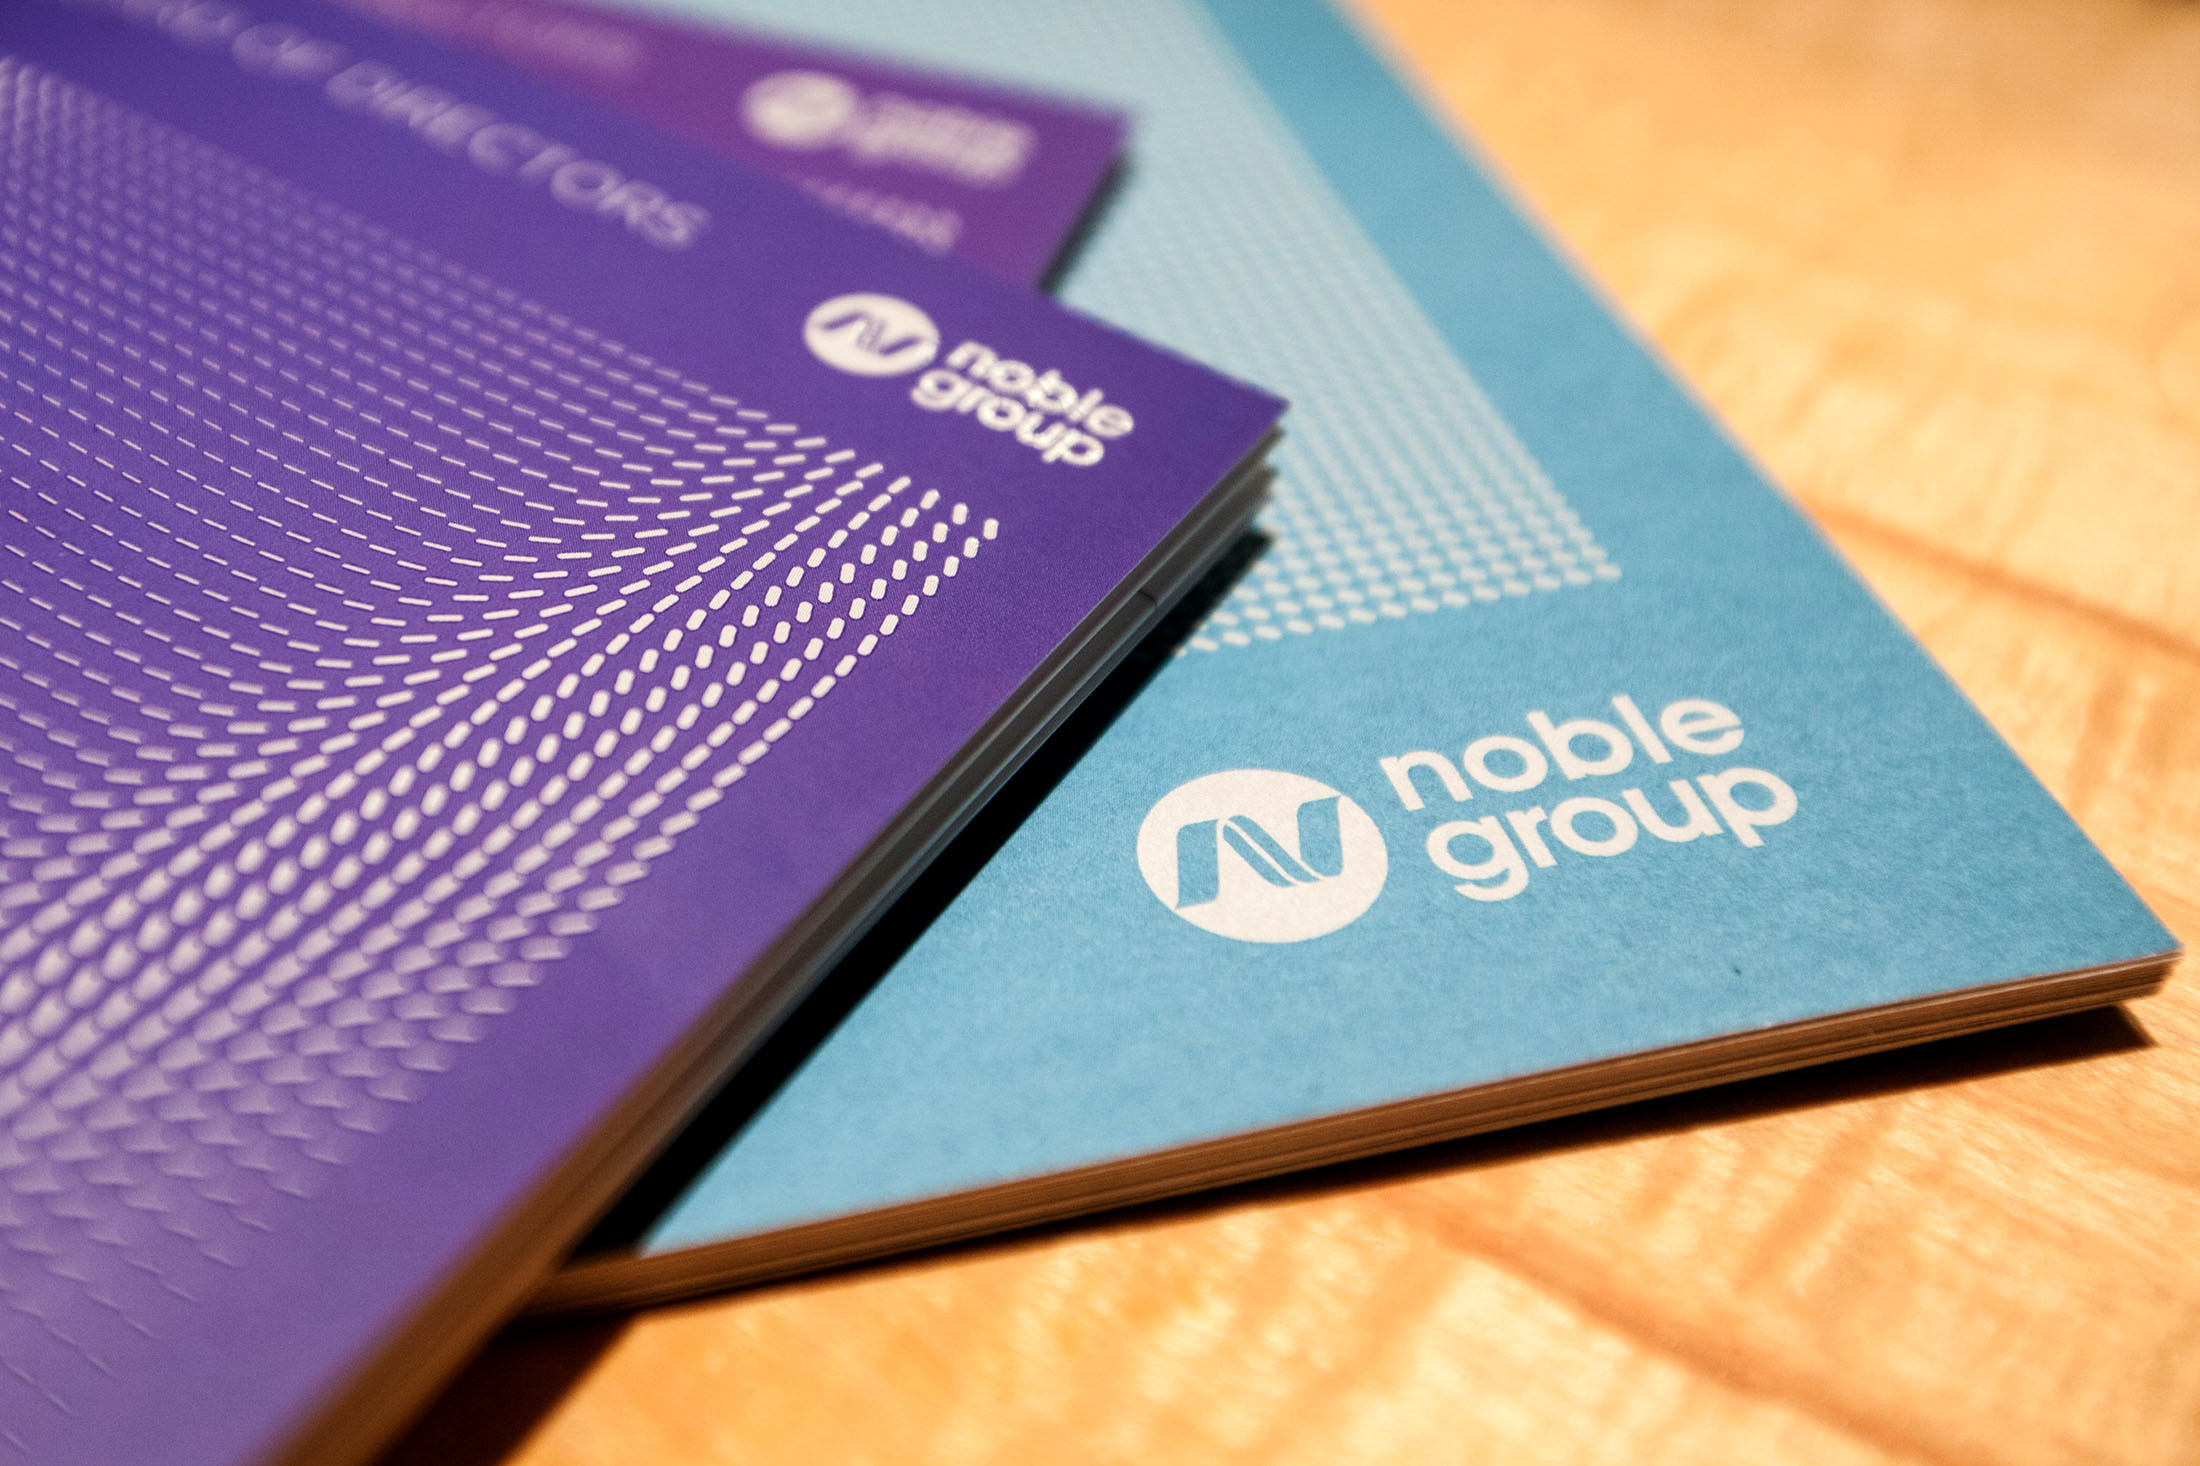 Noble Group Ltd. booklets sit on a table before a news conference during an investor day in Singapore, on Monday, Aug. 17, 2015. Noble GroupÂ Ltd. pledged to increase operating profit to more than $2 billion in the next three to five years as Asia's largest commodity trader sought to reassure investors about its long-term prospects. Photographer: Nicky Loh/Bloomberg